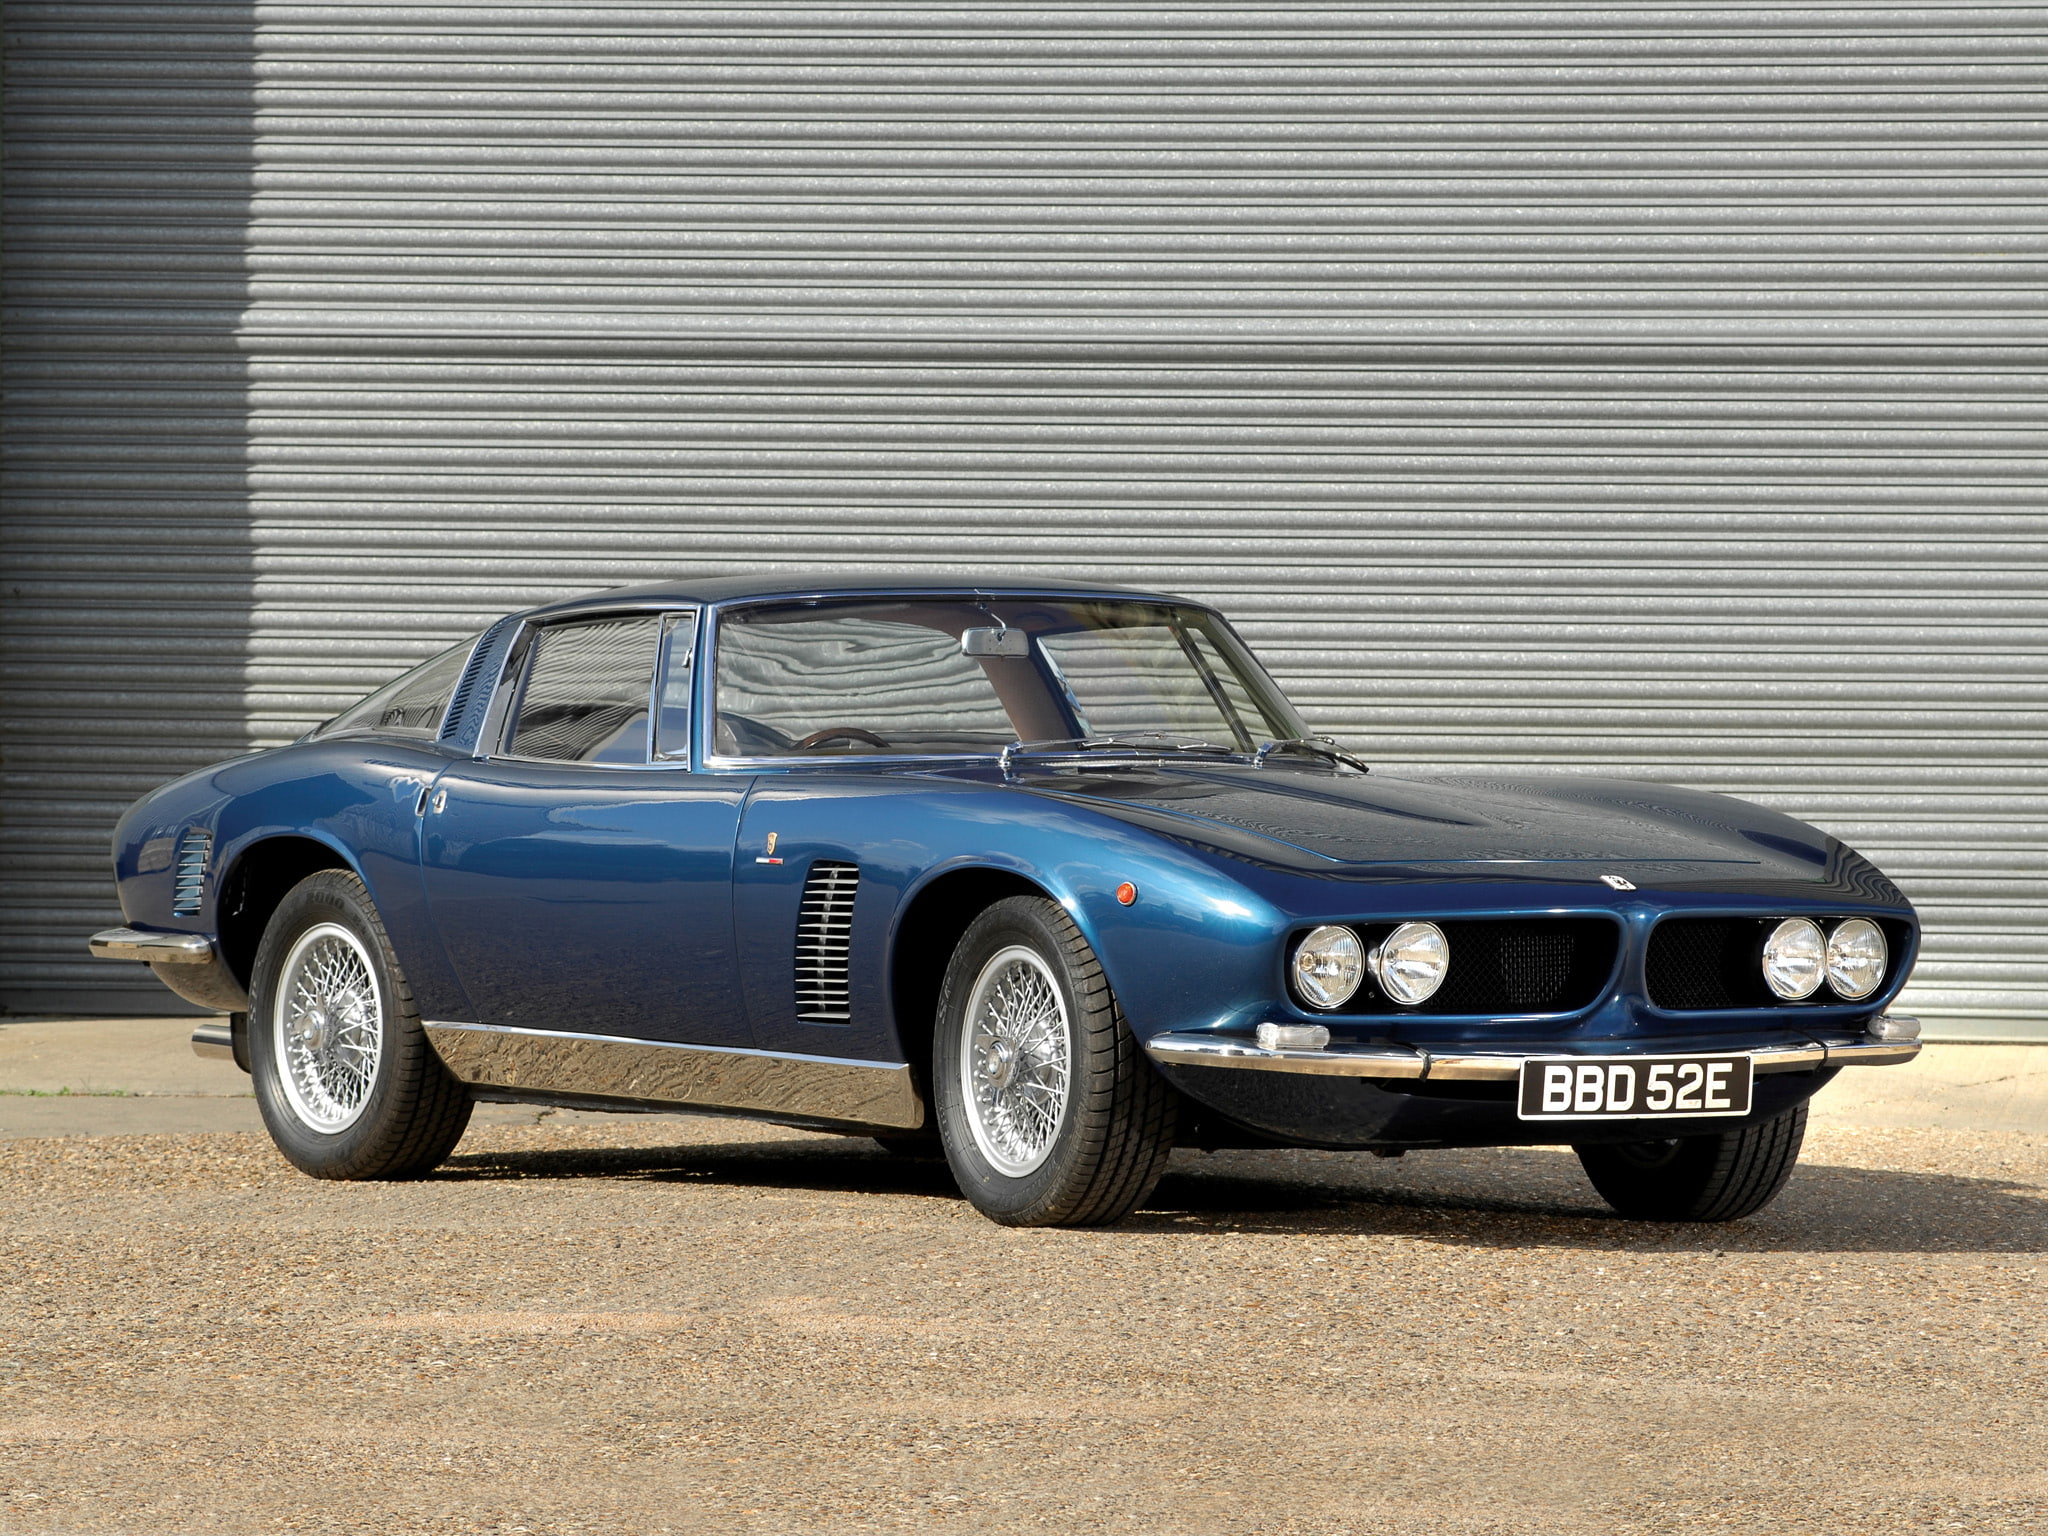 1965, classic, gl350, grifo, iso, muscle, supercar